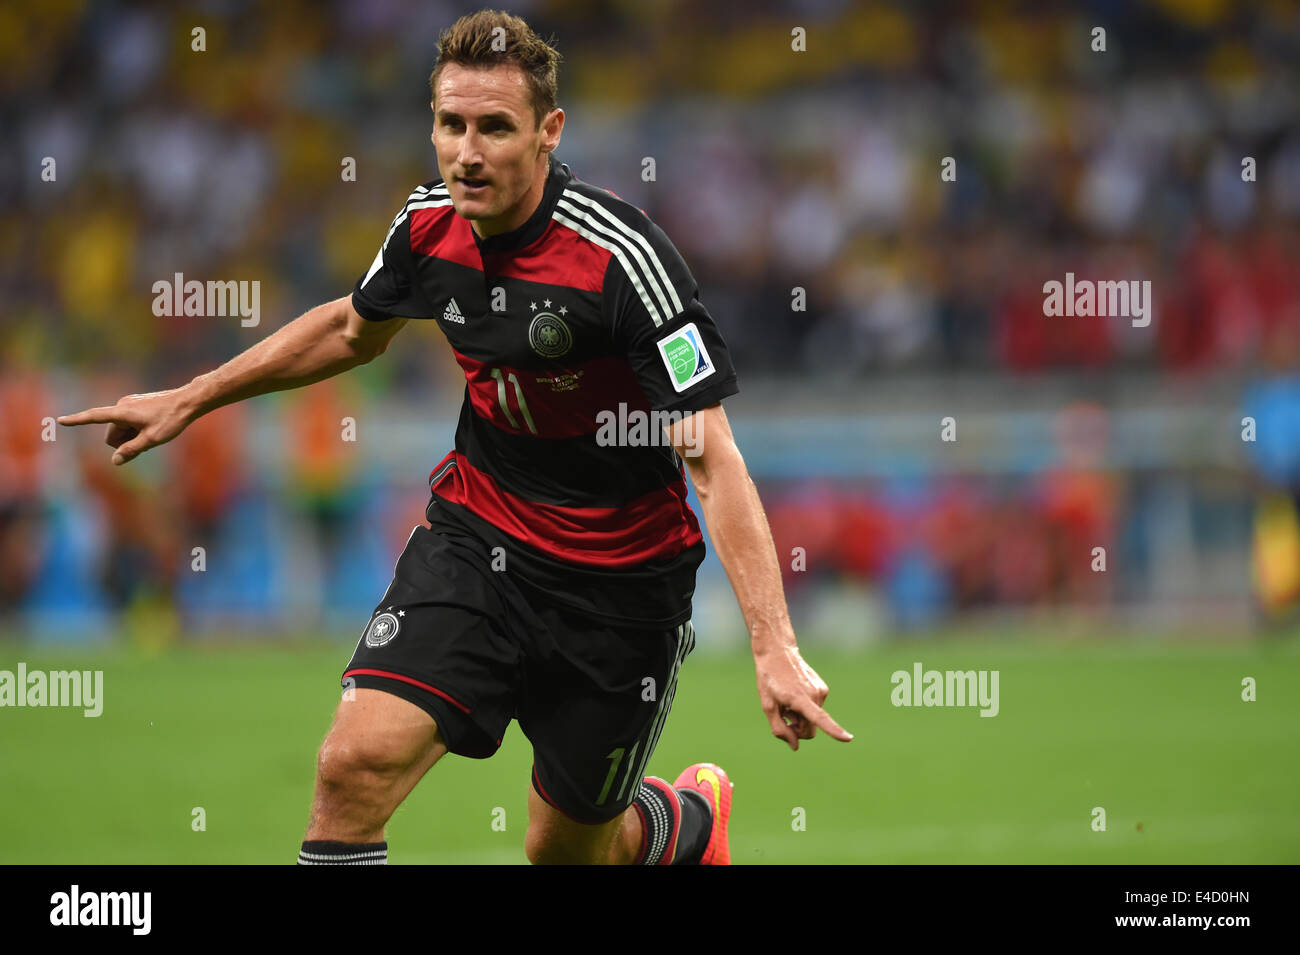 Belo Horizonte, Brazil. 8th July, 2014. Miroslav Klose (GER) Football/Soccer : Miroslav Klose of Germany celebrates after scoring his team's second goal during the FIFA World Cup 2014 semi-finals match between Brazil 1-7 Germany at Mineirao stadium in Belo Horizonte, Brazil . Credit:  FAR EAST PRESS/AFLO/Alamy Live News Stock Photo